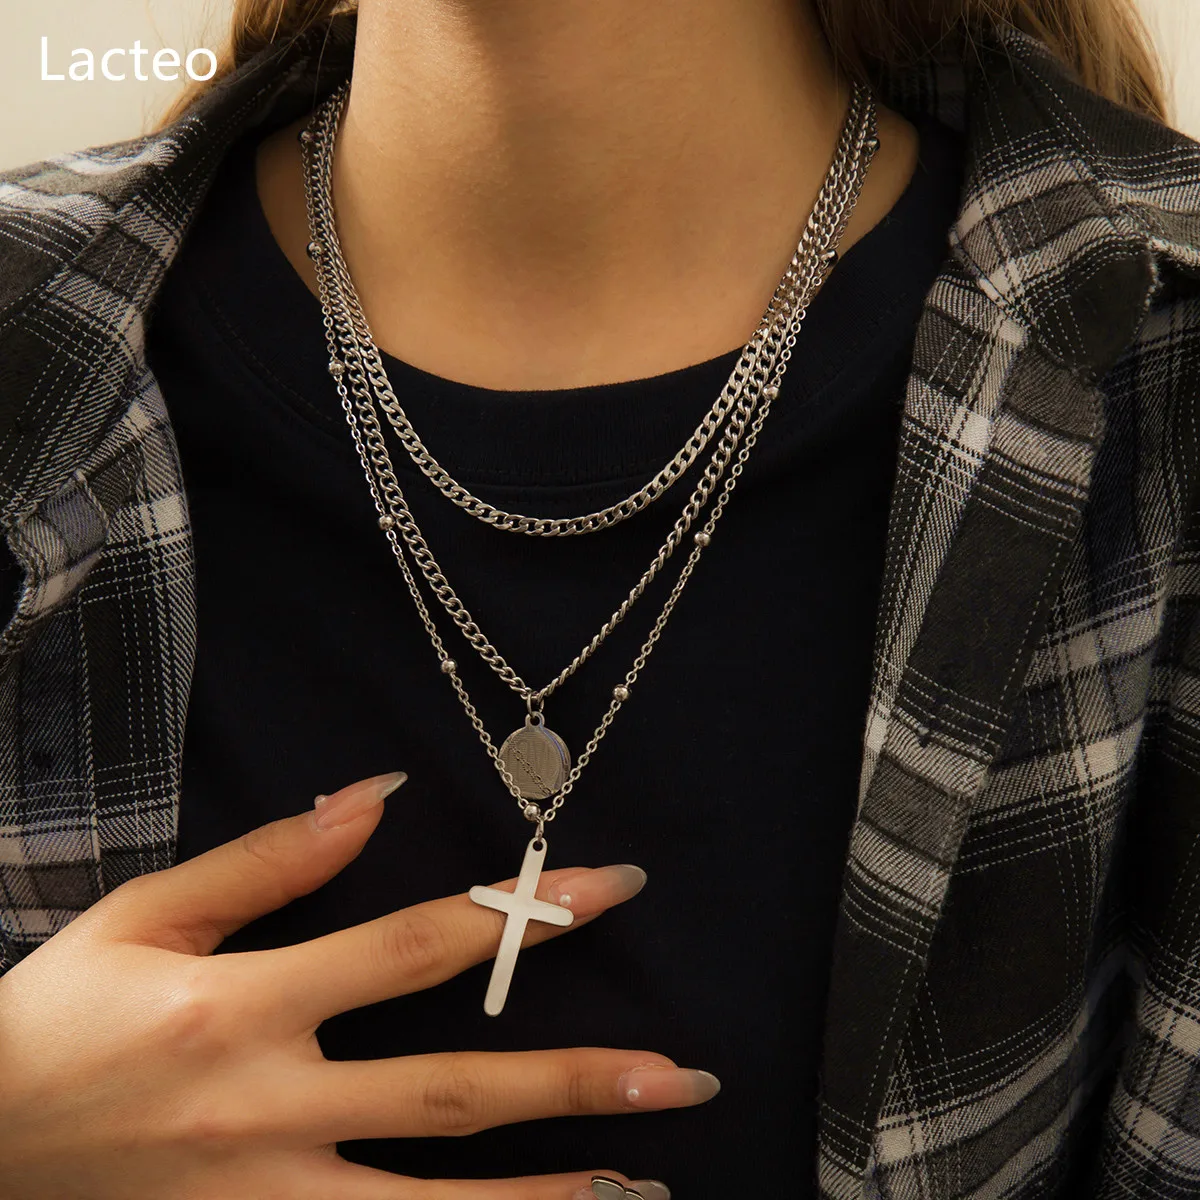 

Lacteo Neo-Gothic Multilayer Stainless Steel Cross Pendant Necklace Steampunk Twisted Clavicle Chain Choker Necklace Jewelry